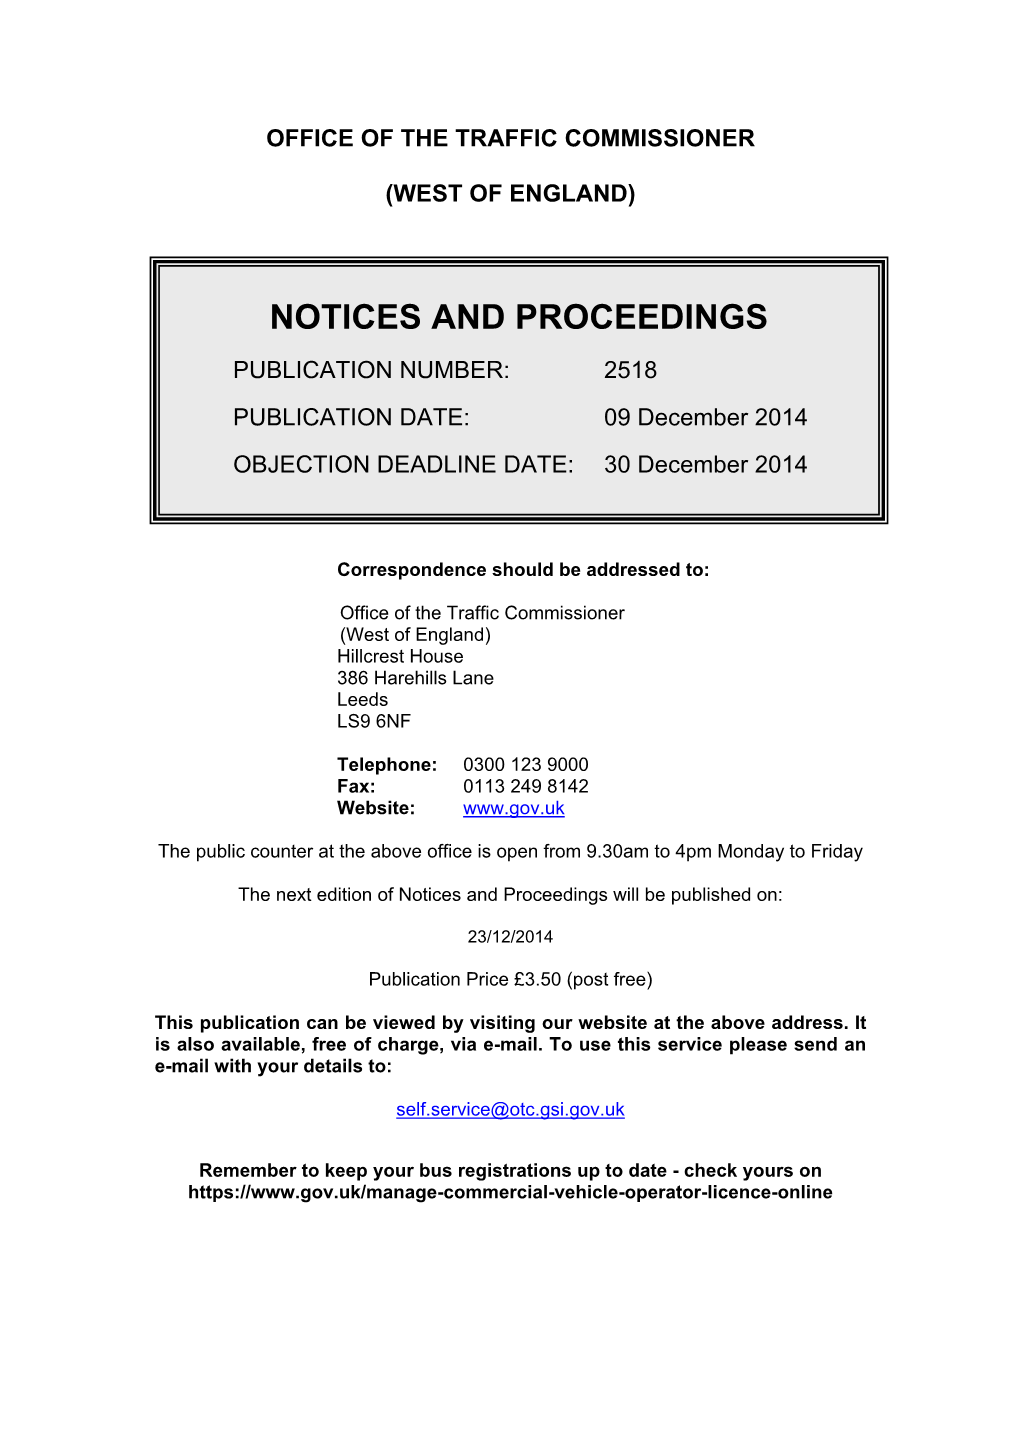 Notices and Proceedings: West of England: 9 December 2014